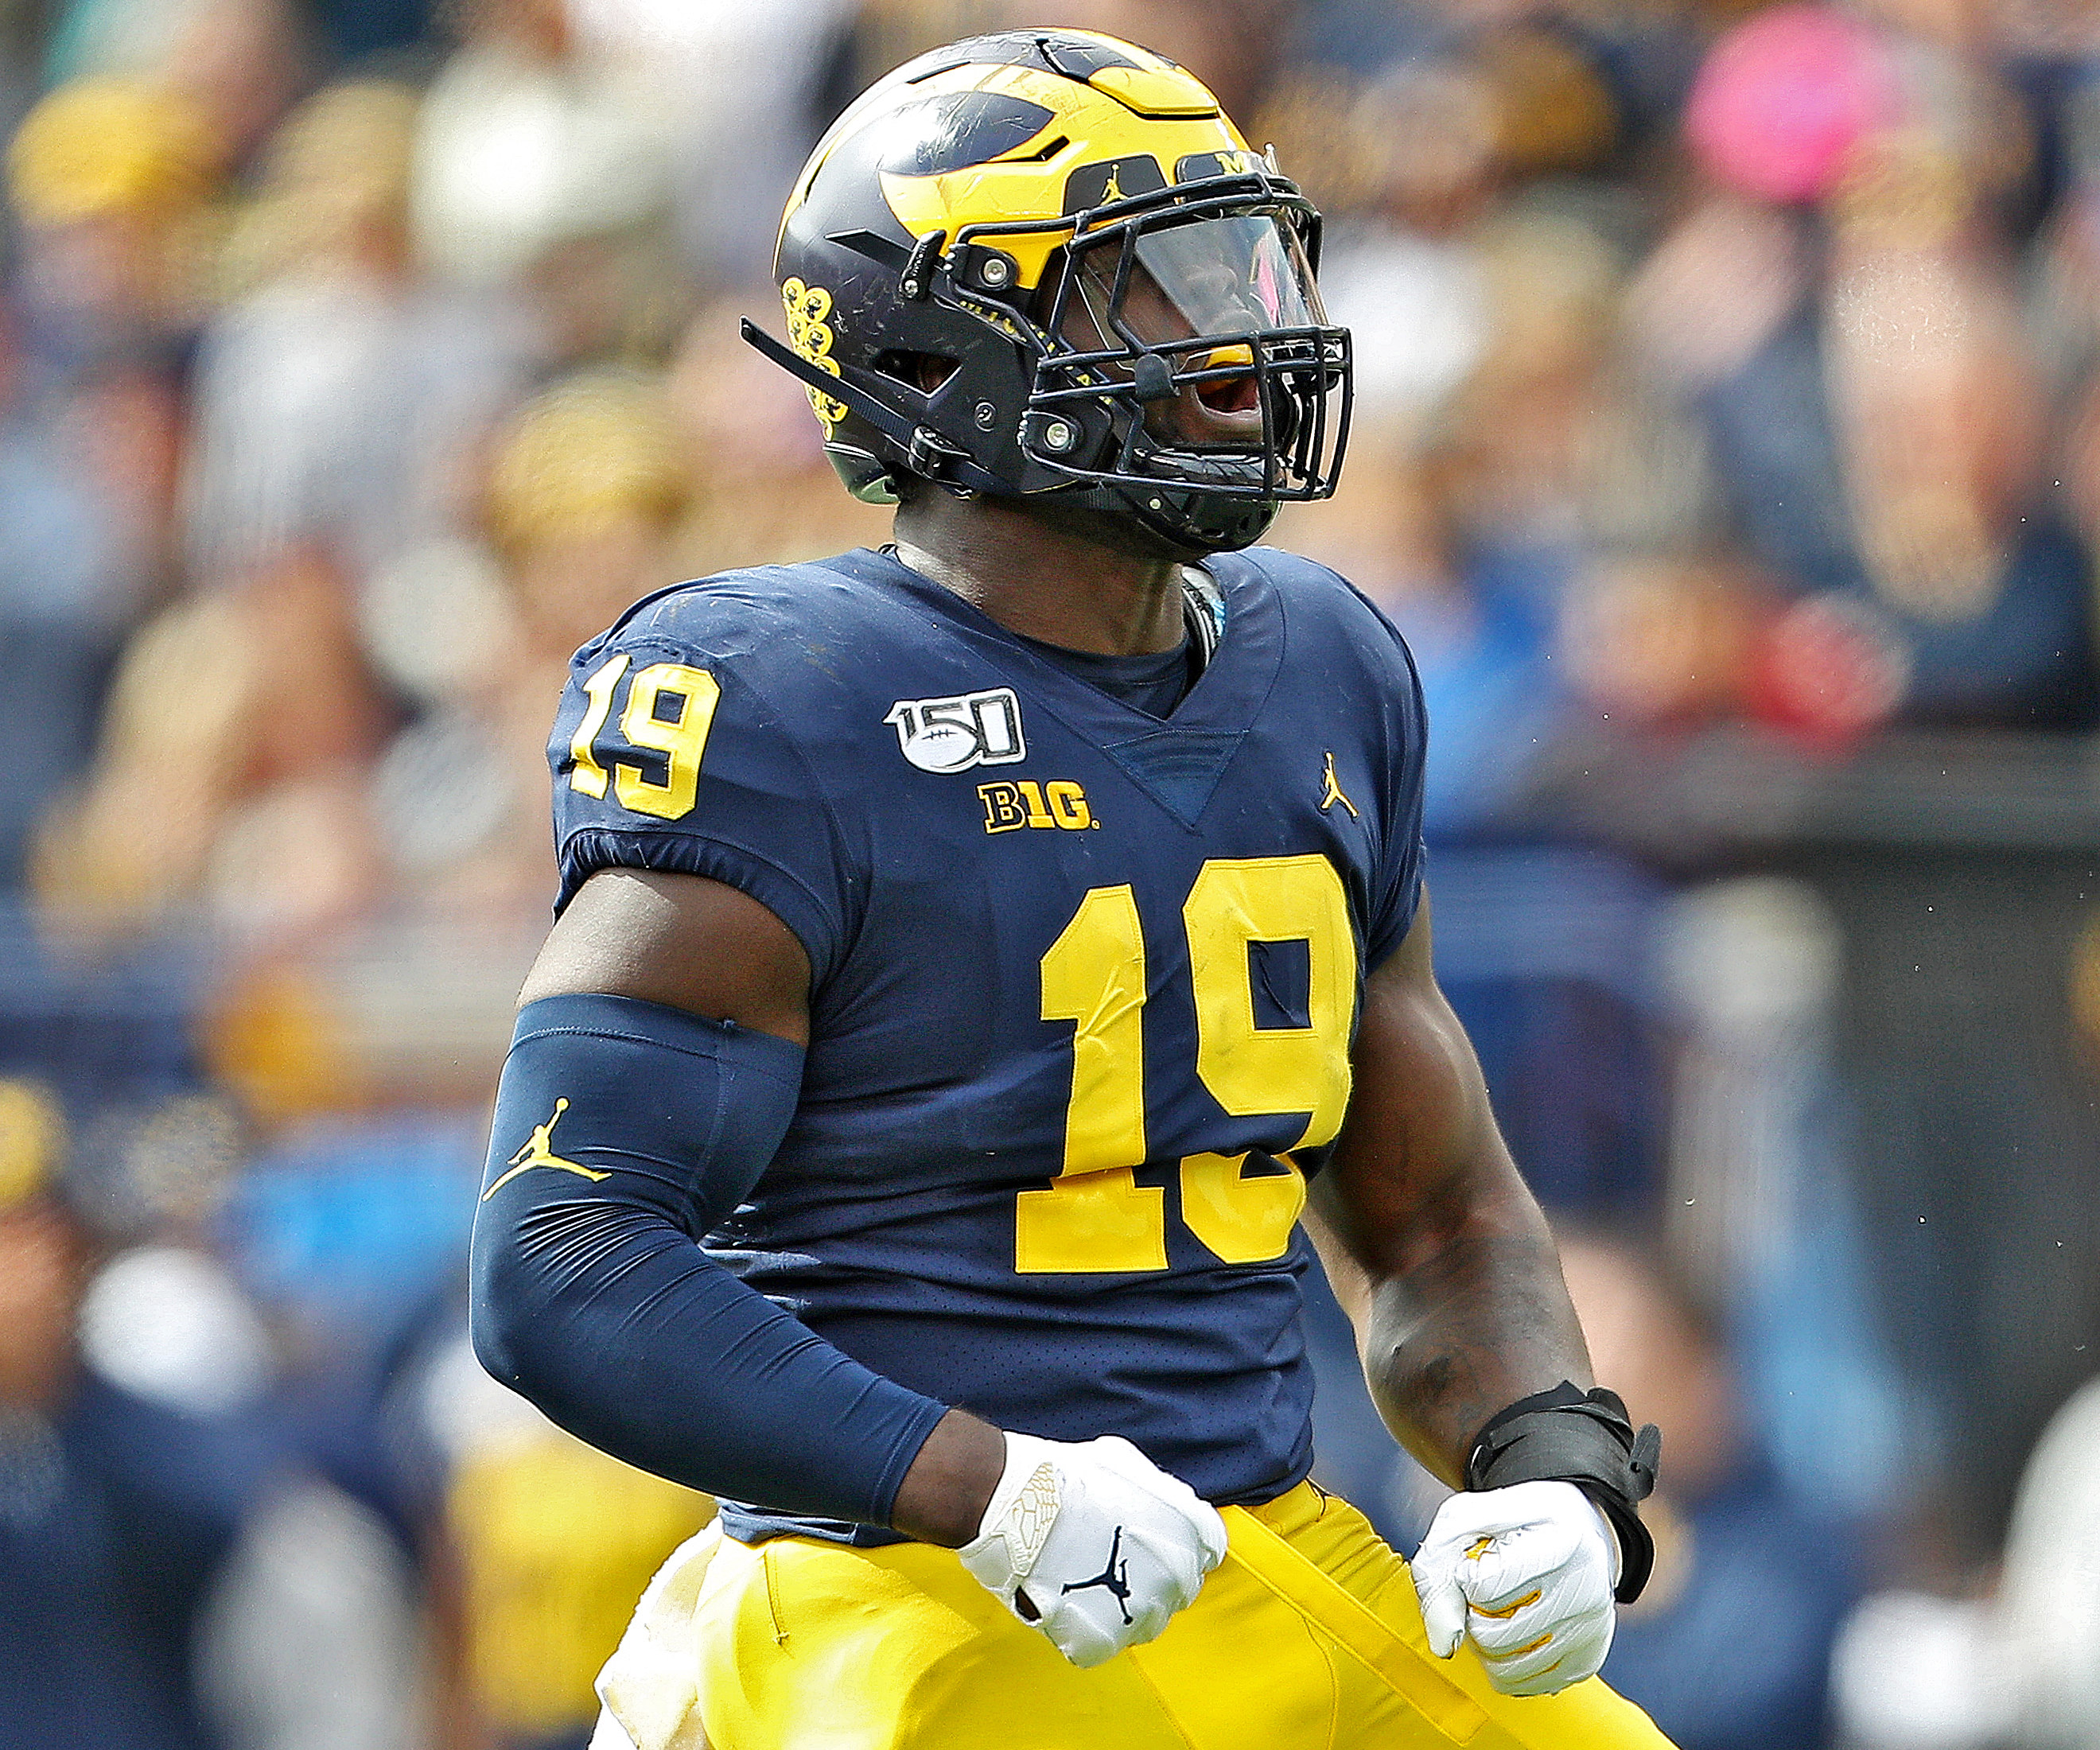 Michigan's Kwity Paye up to No. 14 in new NFL mock draft - mlive.com